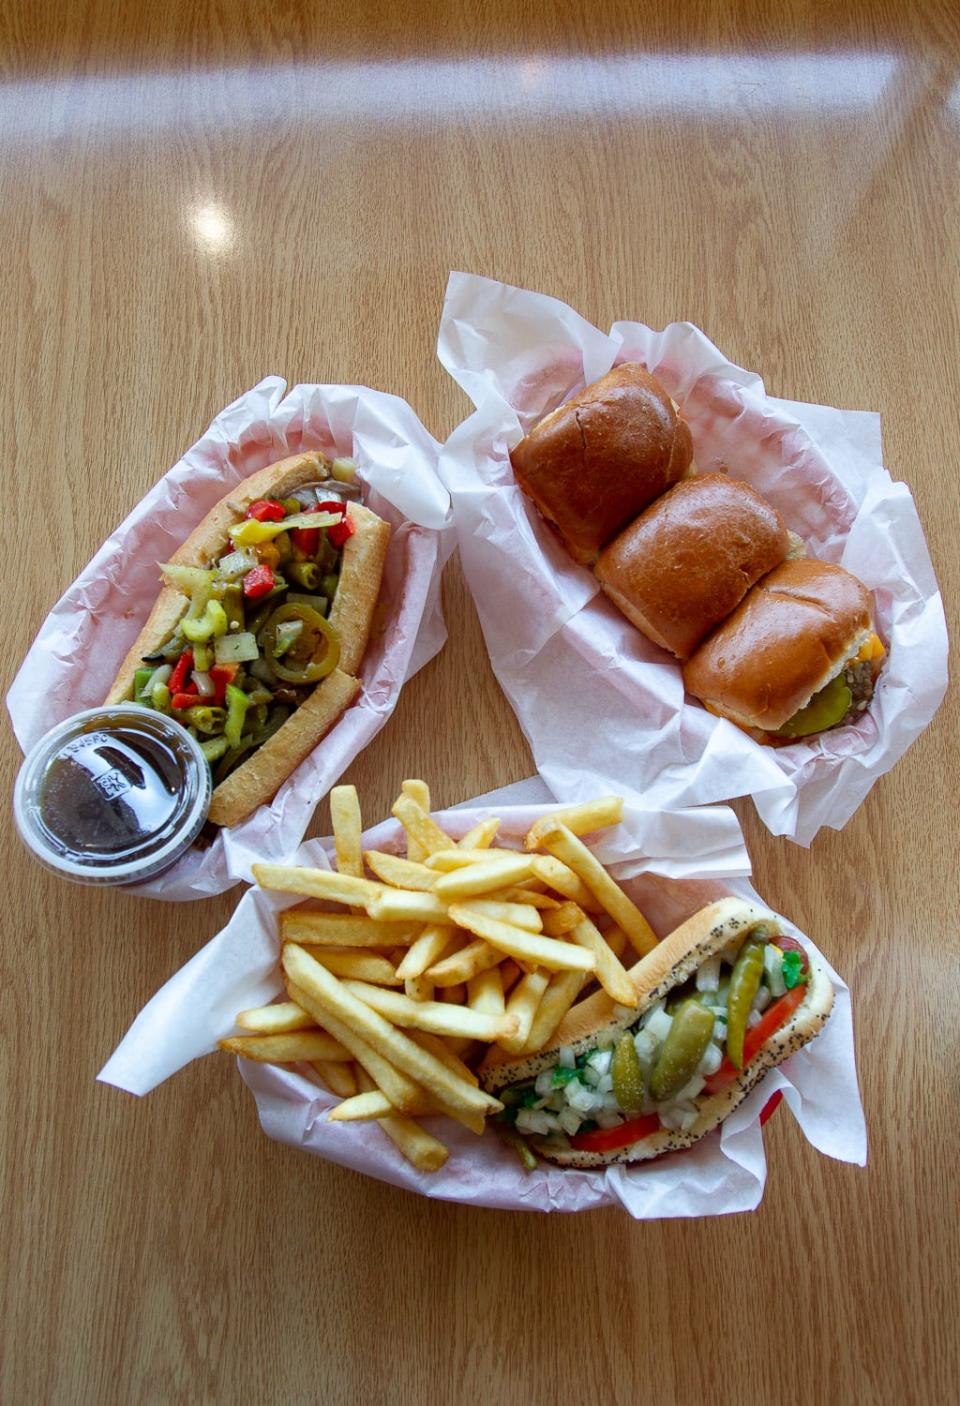 An Italian beef sandwich with hot and sweet peppers, a Chicago style hot dog with french fries and cheese sliders at Chicago Hamburger Company, Nov. 5, 2019.